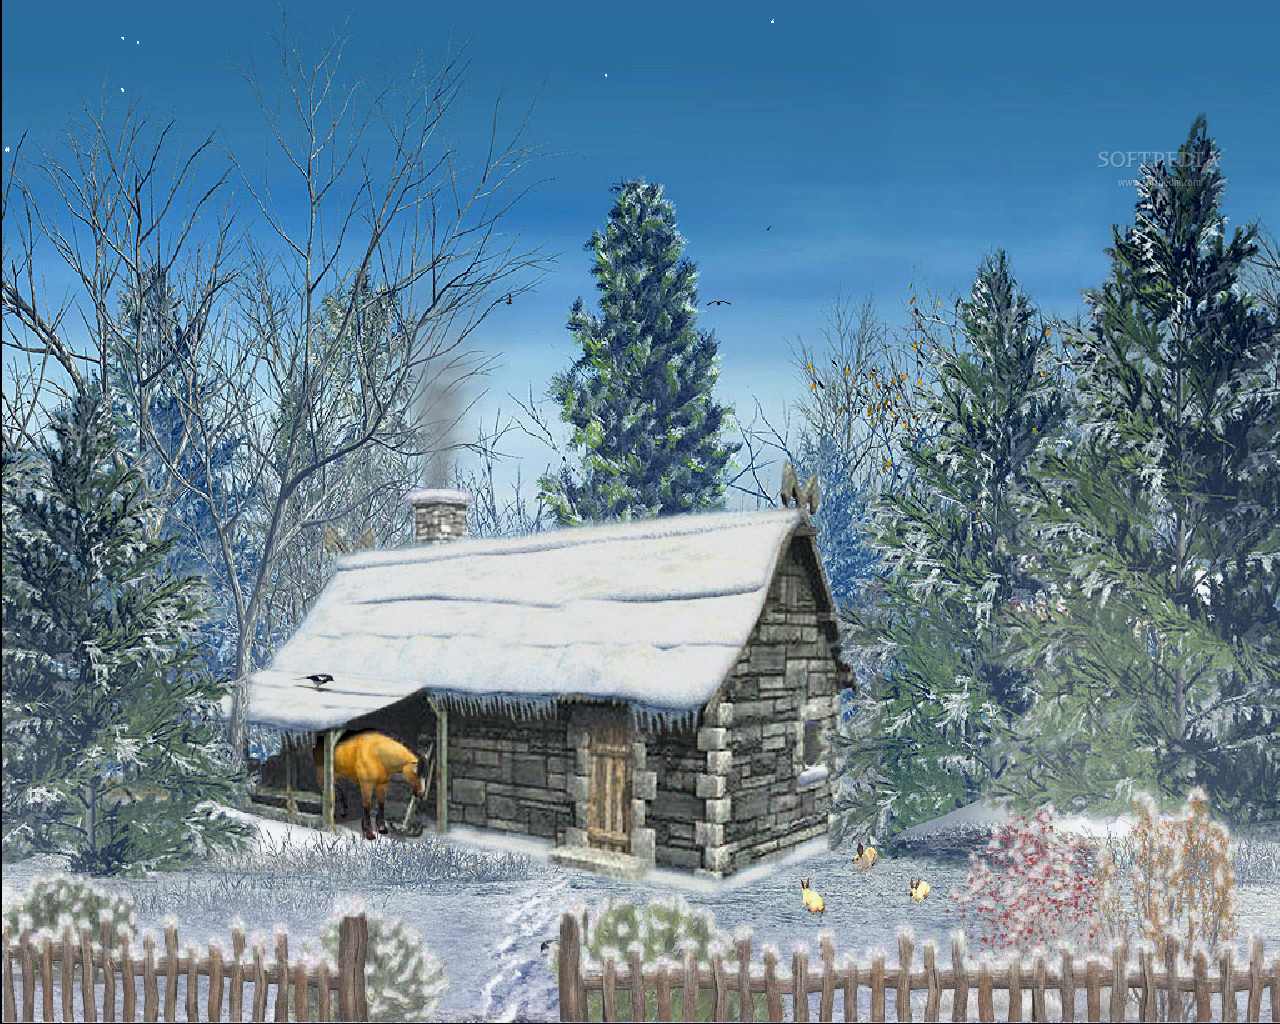 Snowy Hut Animated Wallpaper This Is The Image Displayed By